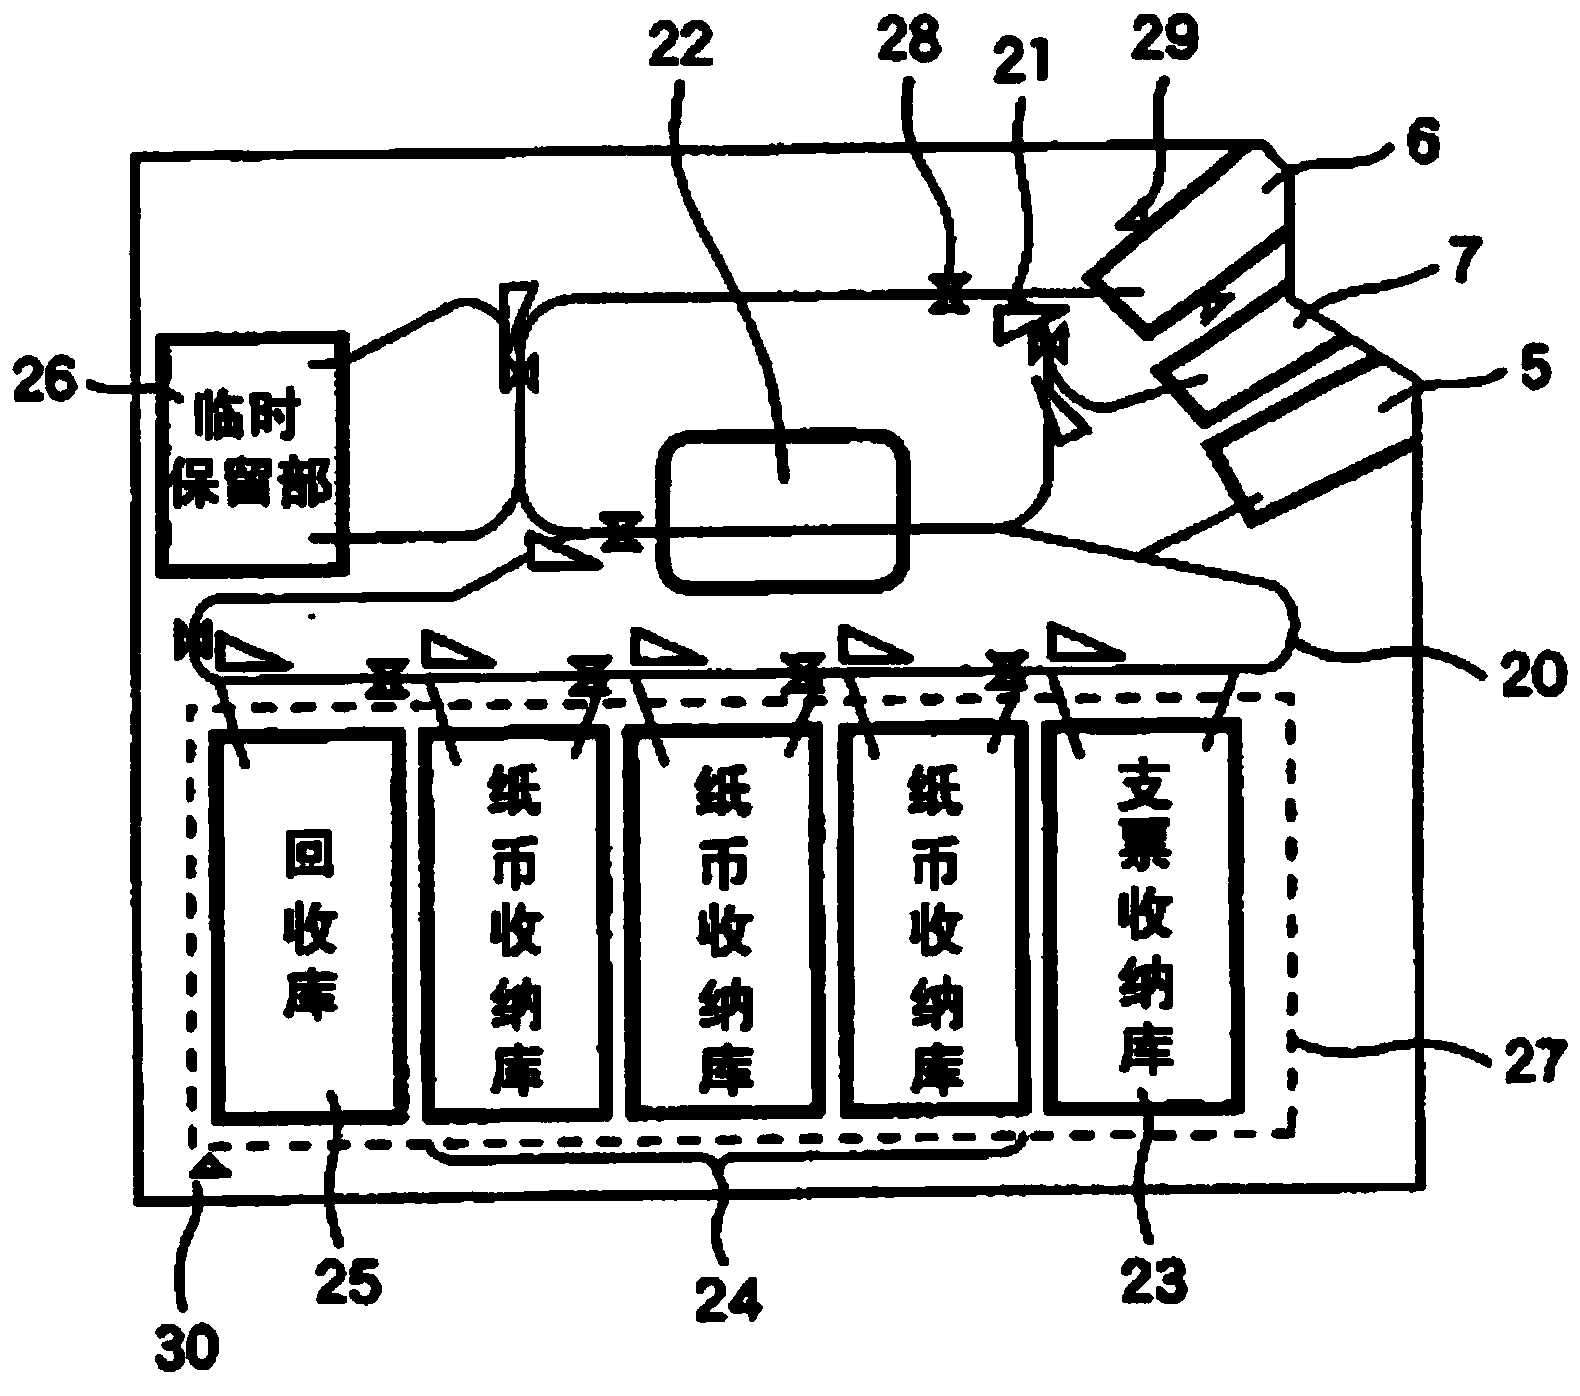 Paper processing system having foreign currency exchange function